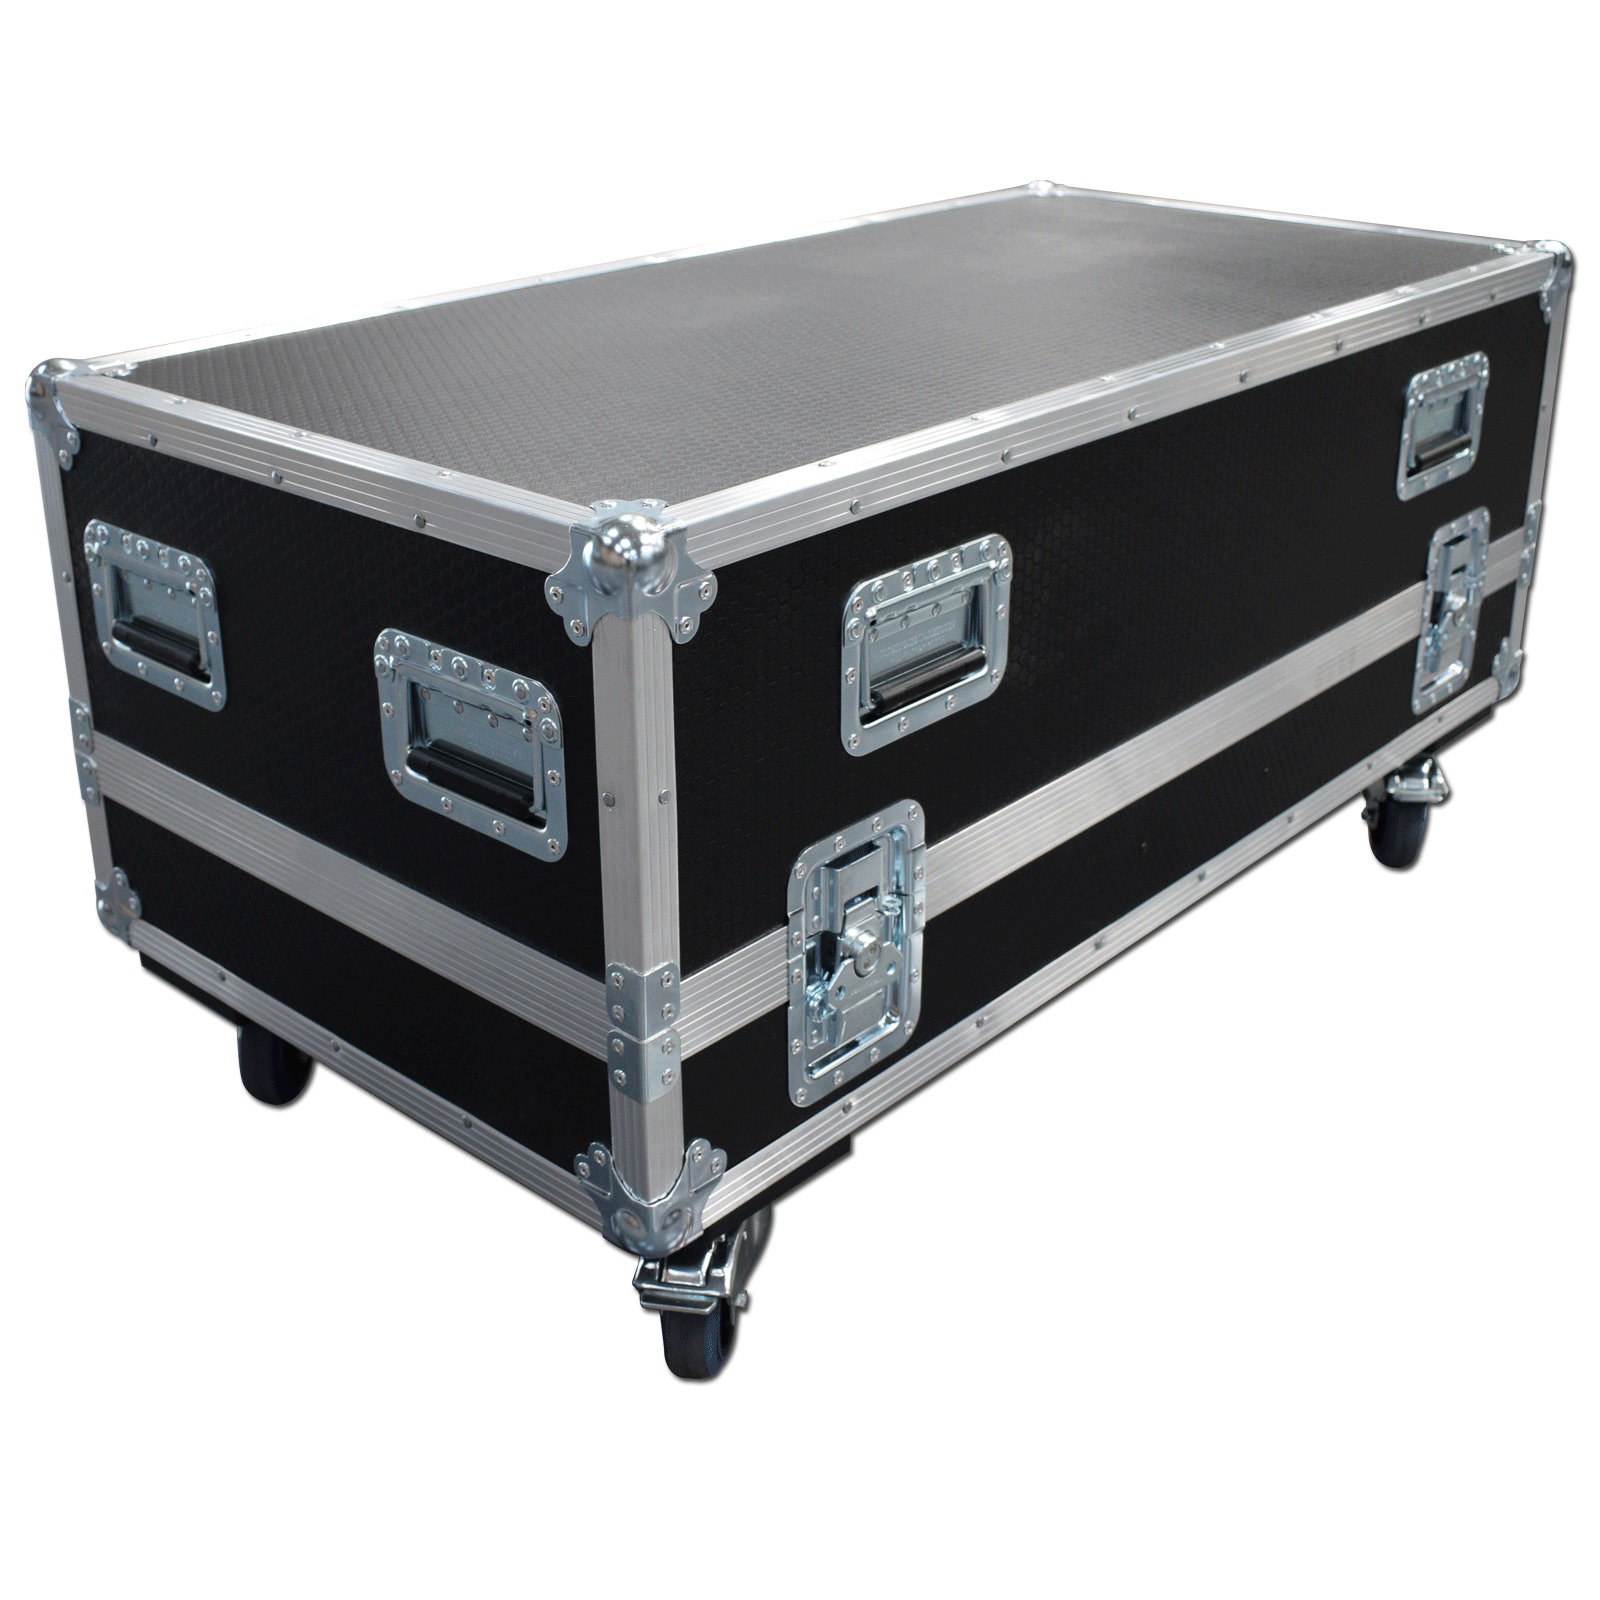 Twin Speaker Flightcase for Funktion 1 RM12 Monitor With 150mm Storage Compartment 